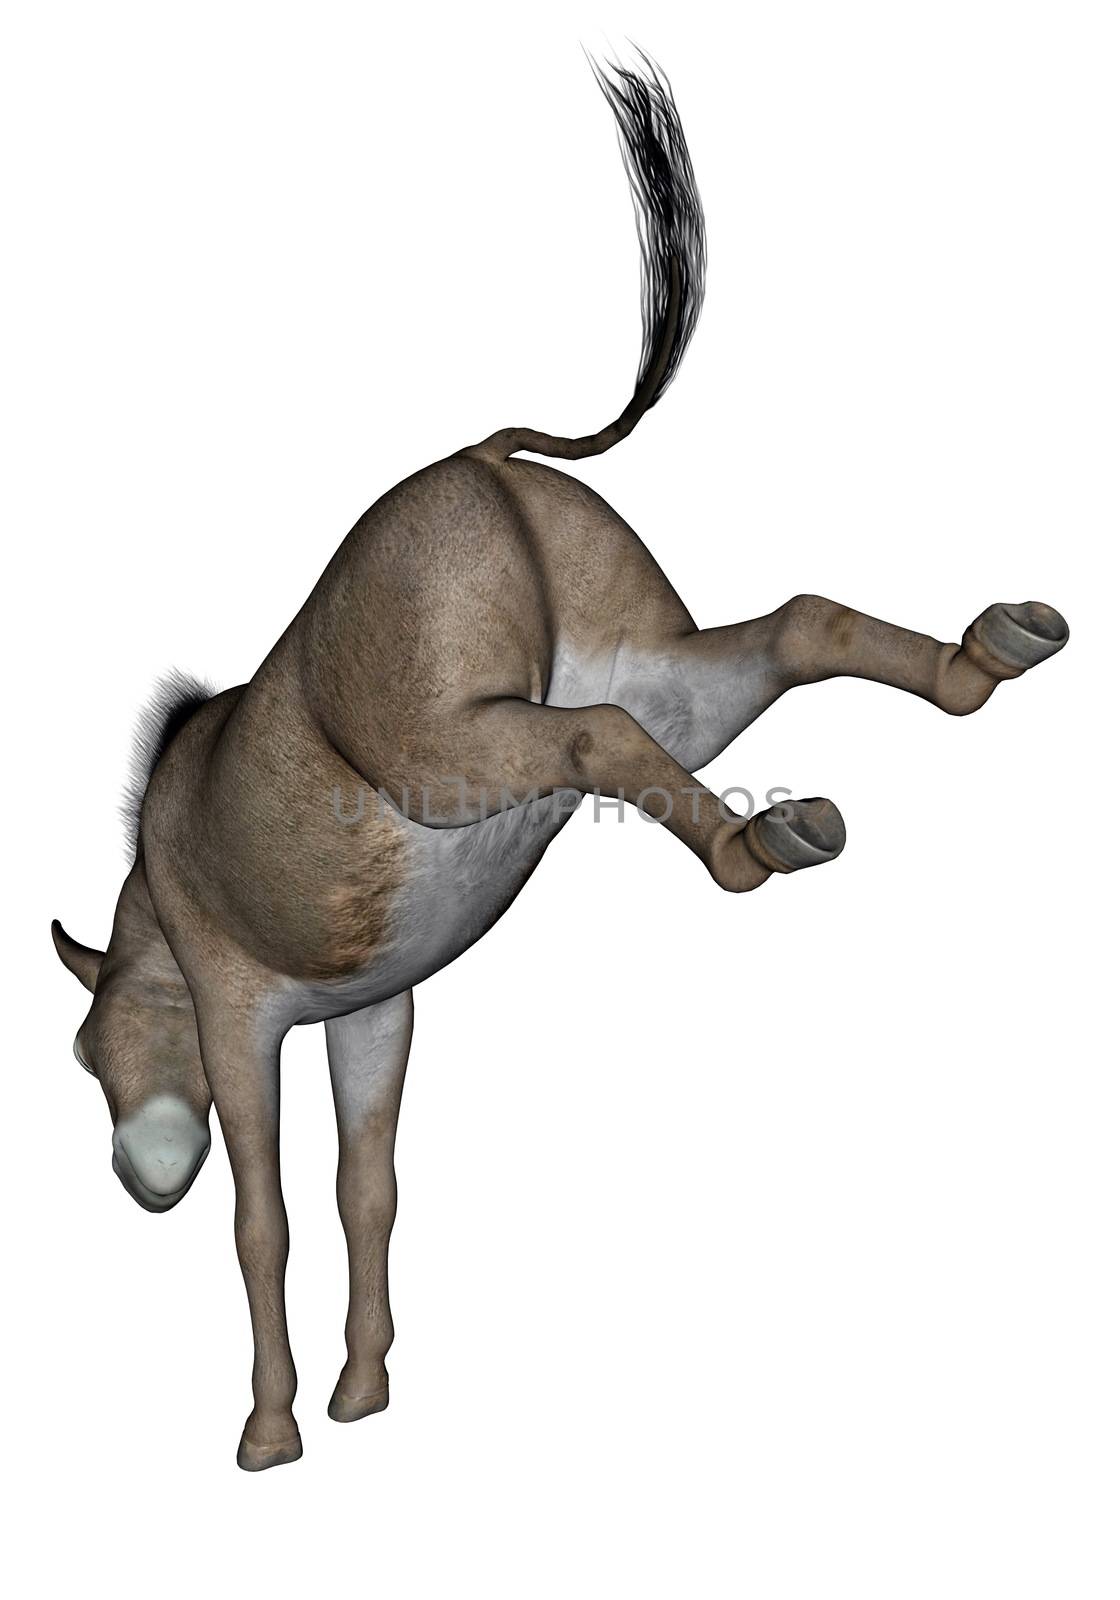 Common donkey rearing back feet in white background